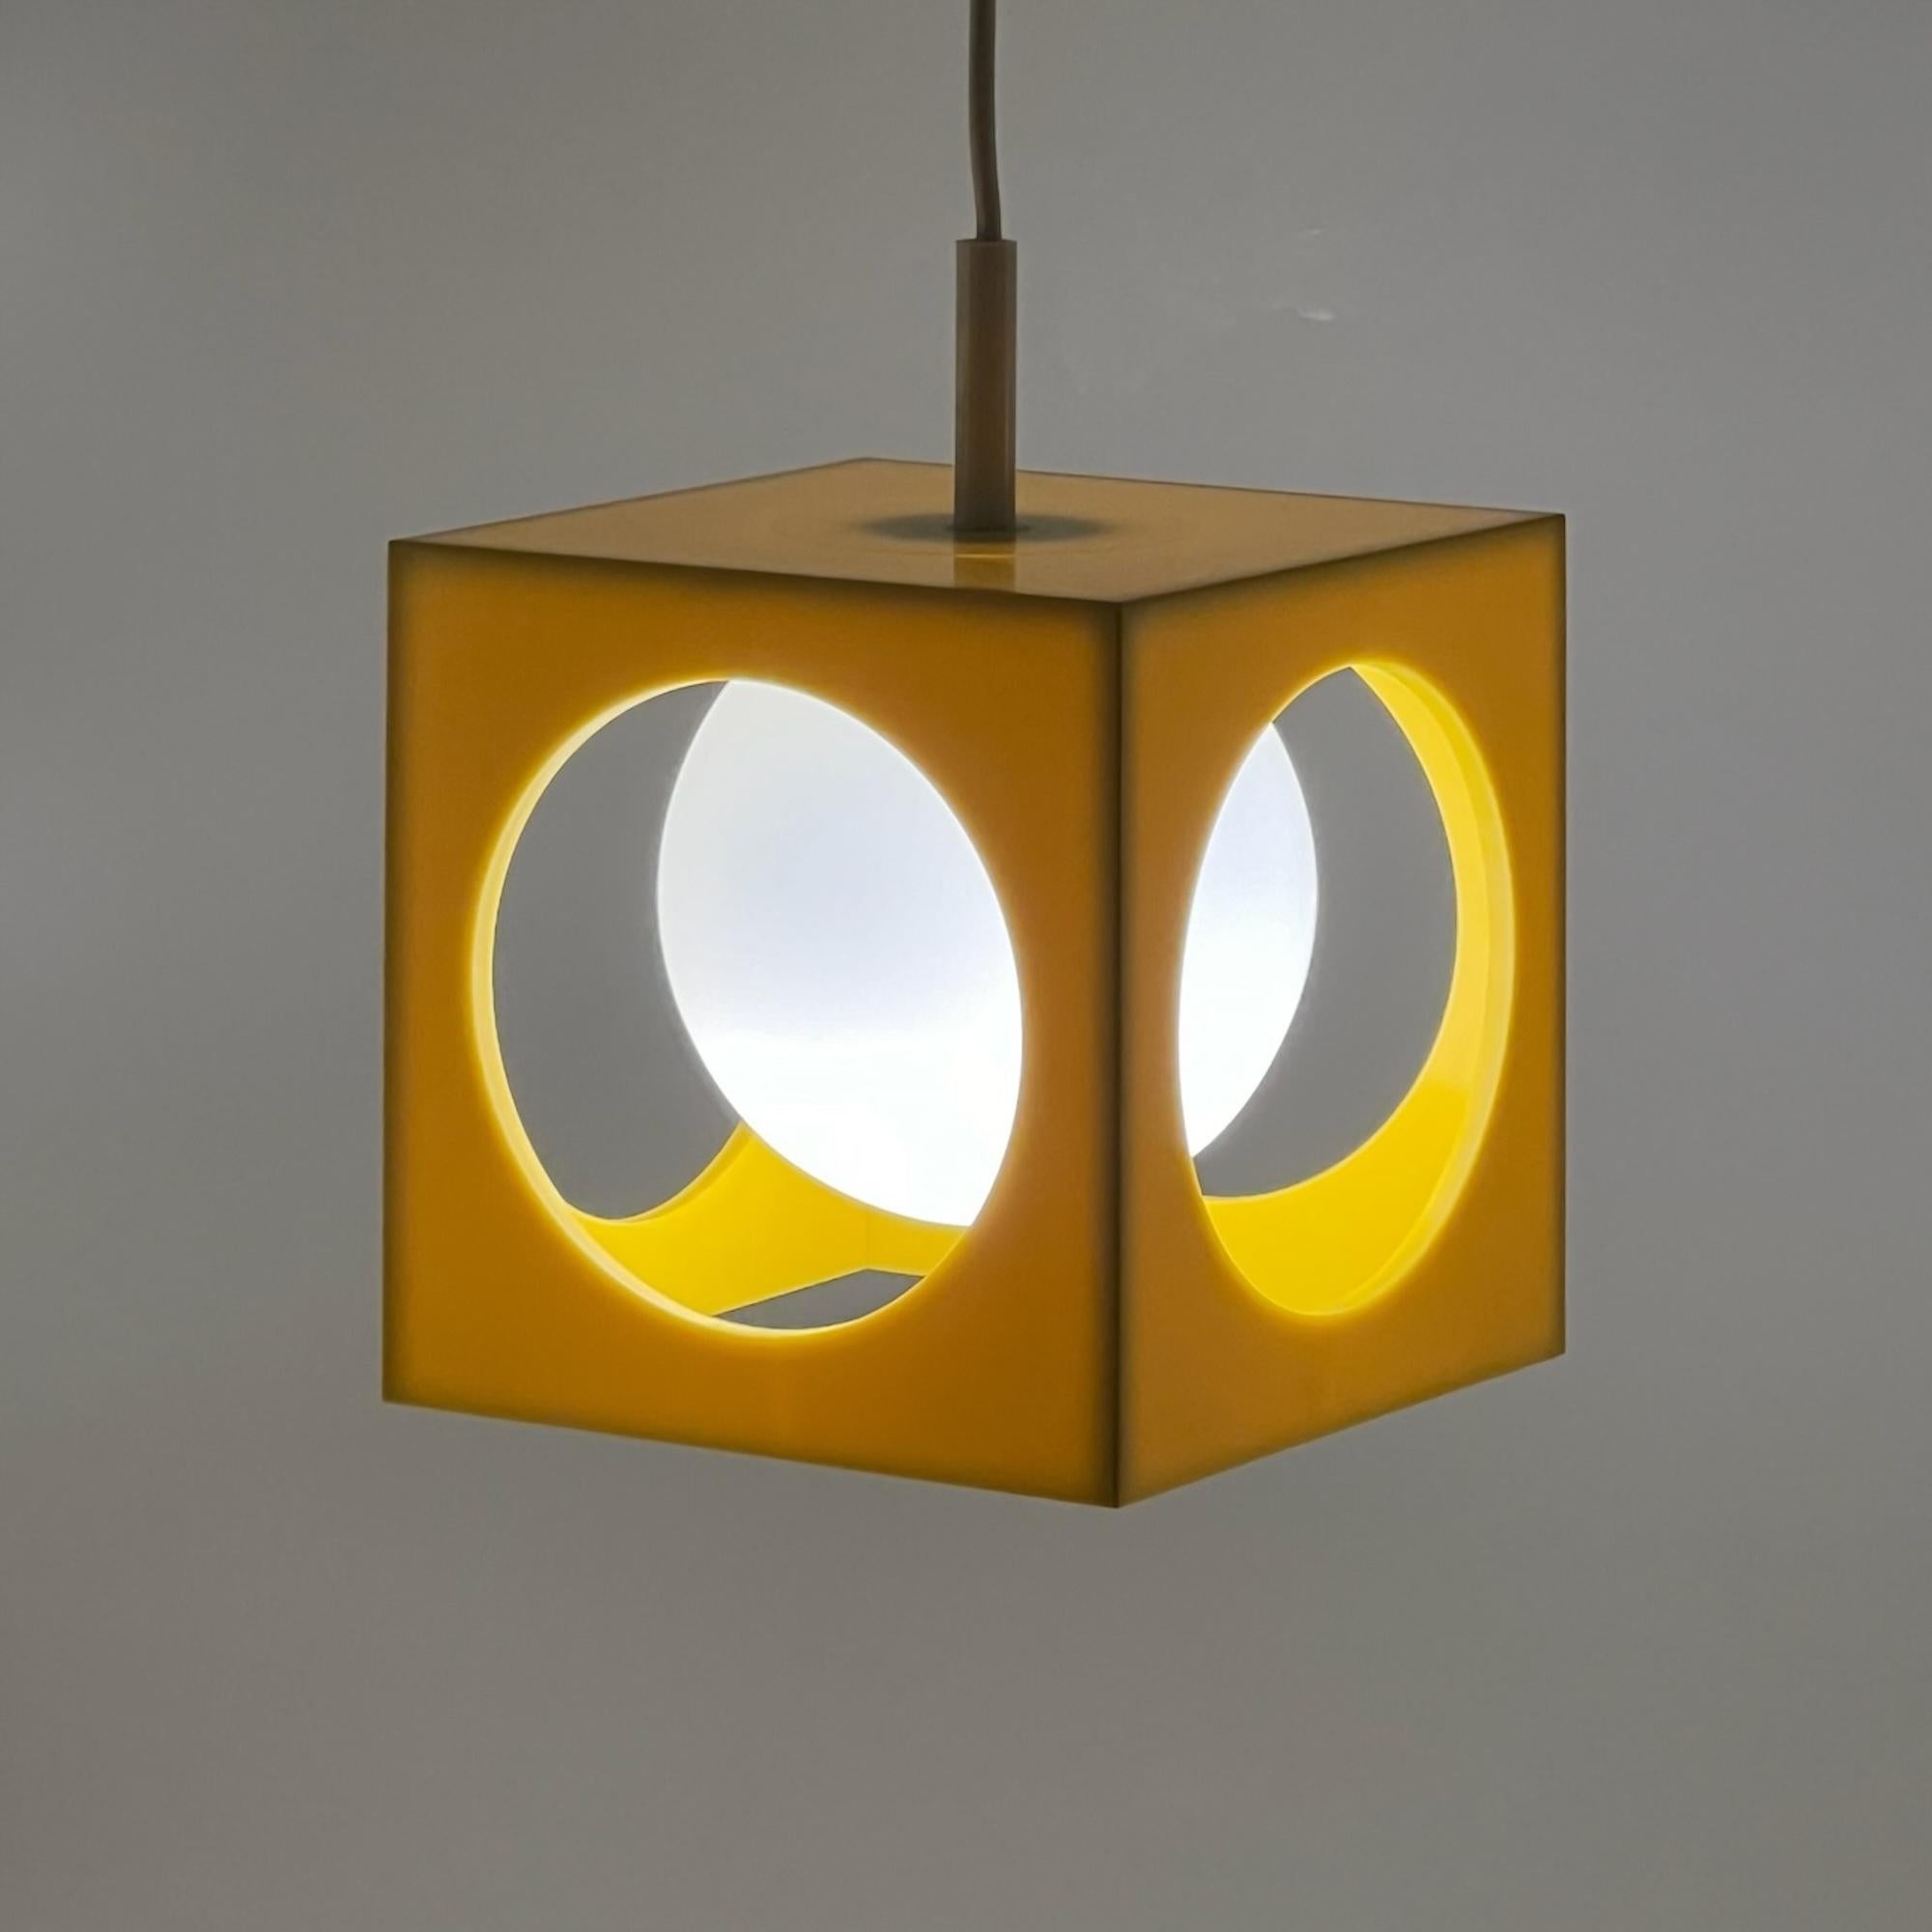 Glass Iconic Space Age Lamp by Richard Essig - Avantgarde Design from the 1970s For Sale